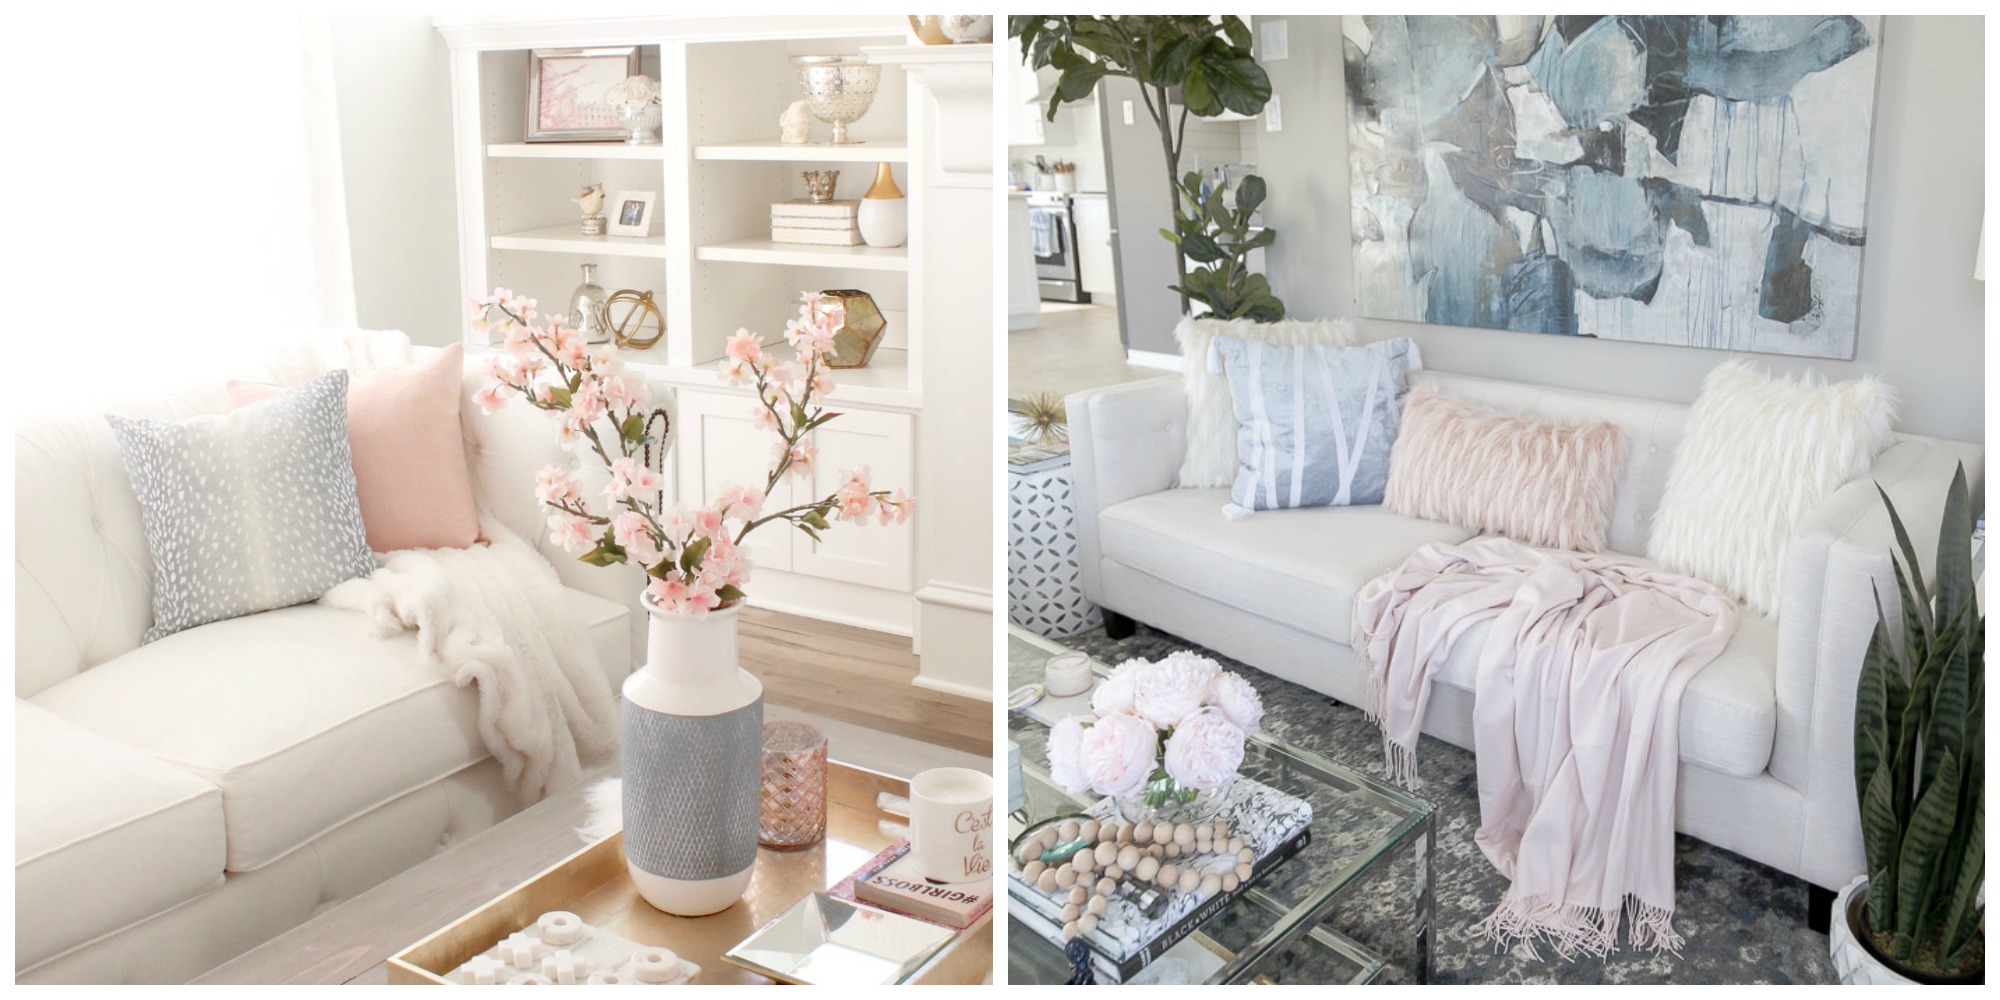 DIY home decor ideas - see 25+ STUNNING Spring Home Tours!